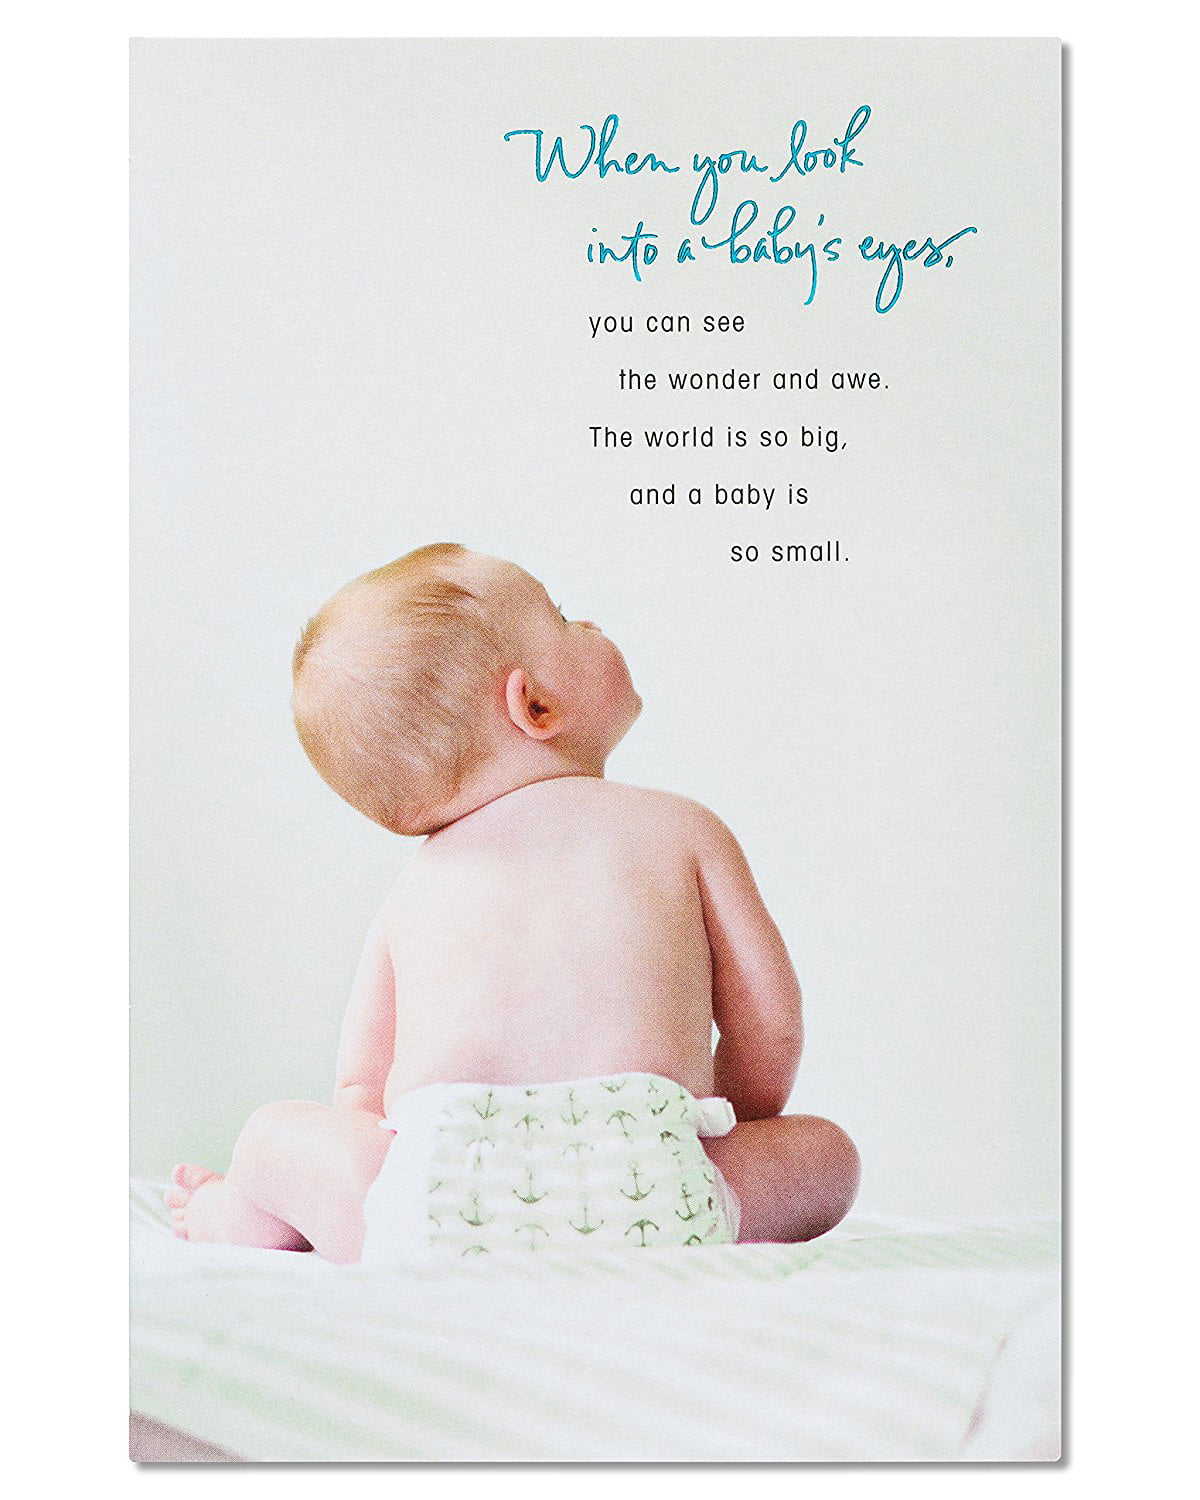 Baby Shower Cards and Gift Wrap - Walmart.com